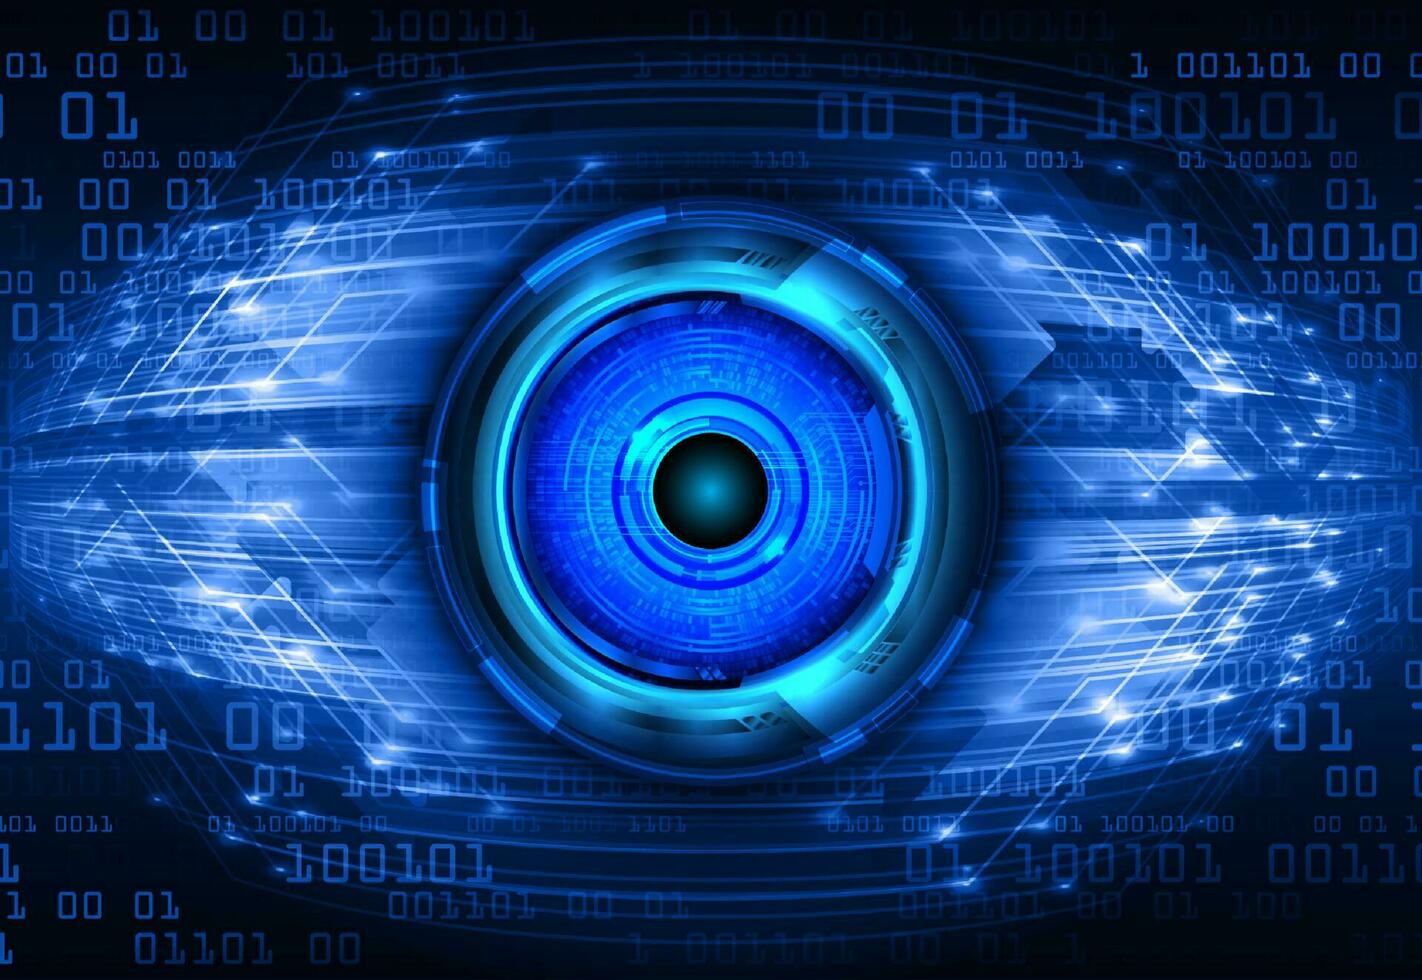 Modern Cybersecurity Technology Icon Pack with Eyes vector